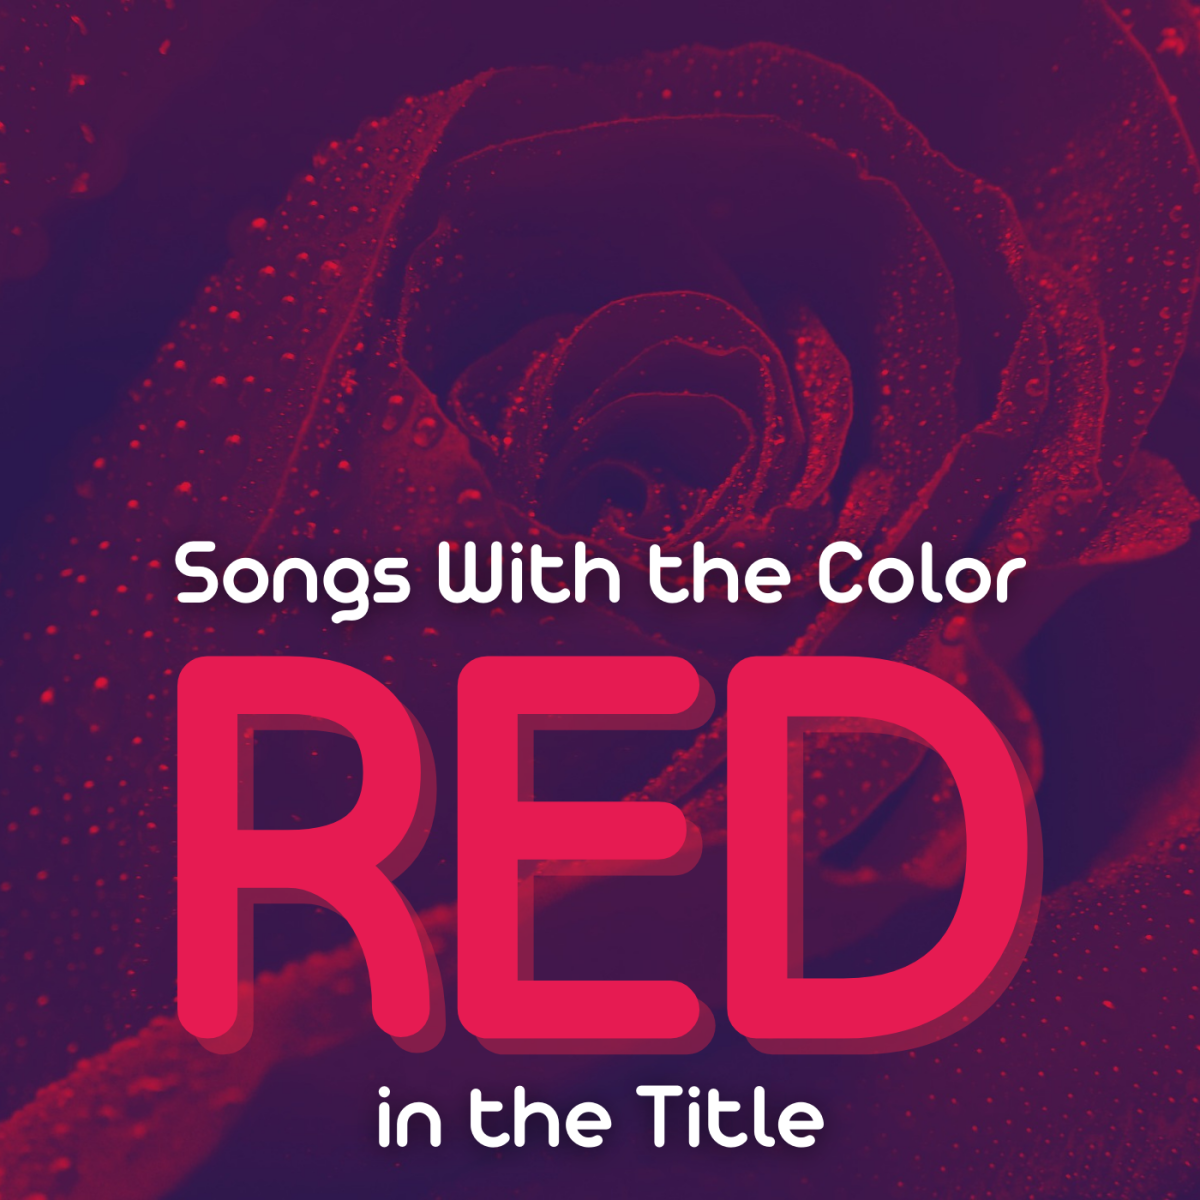 71 Popular Songs With the Color Red the - Spinditty